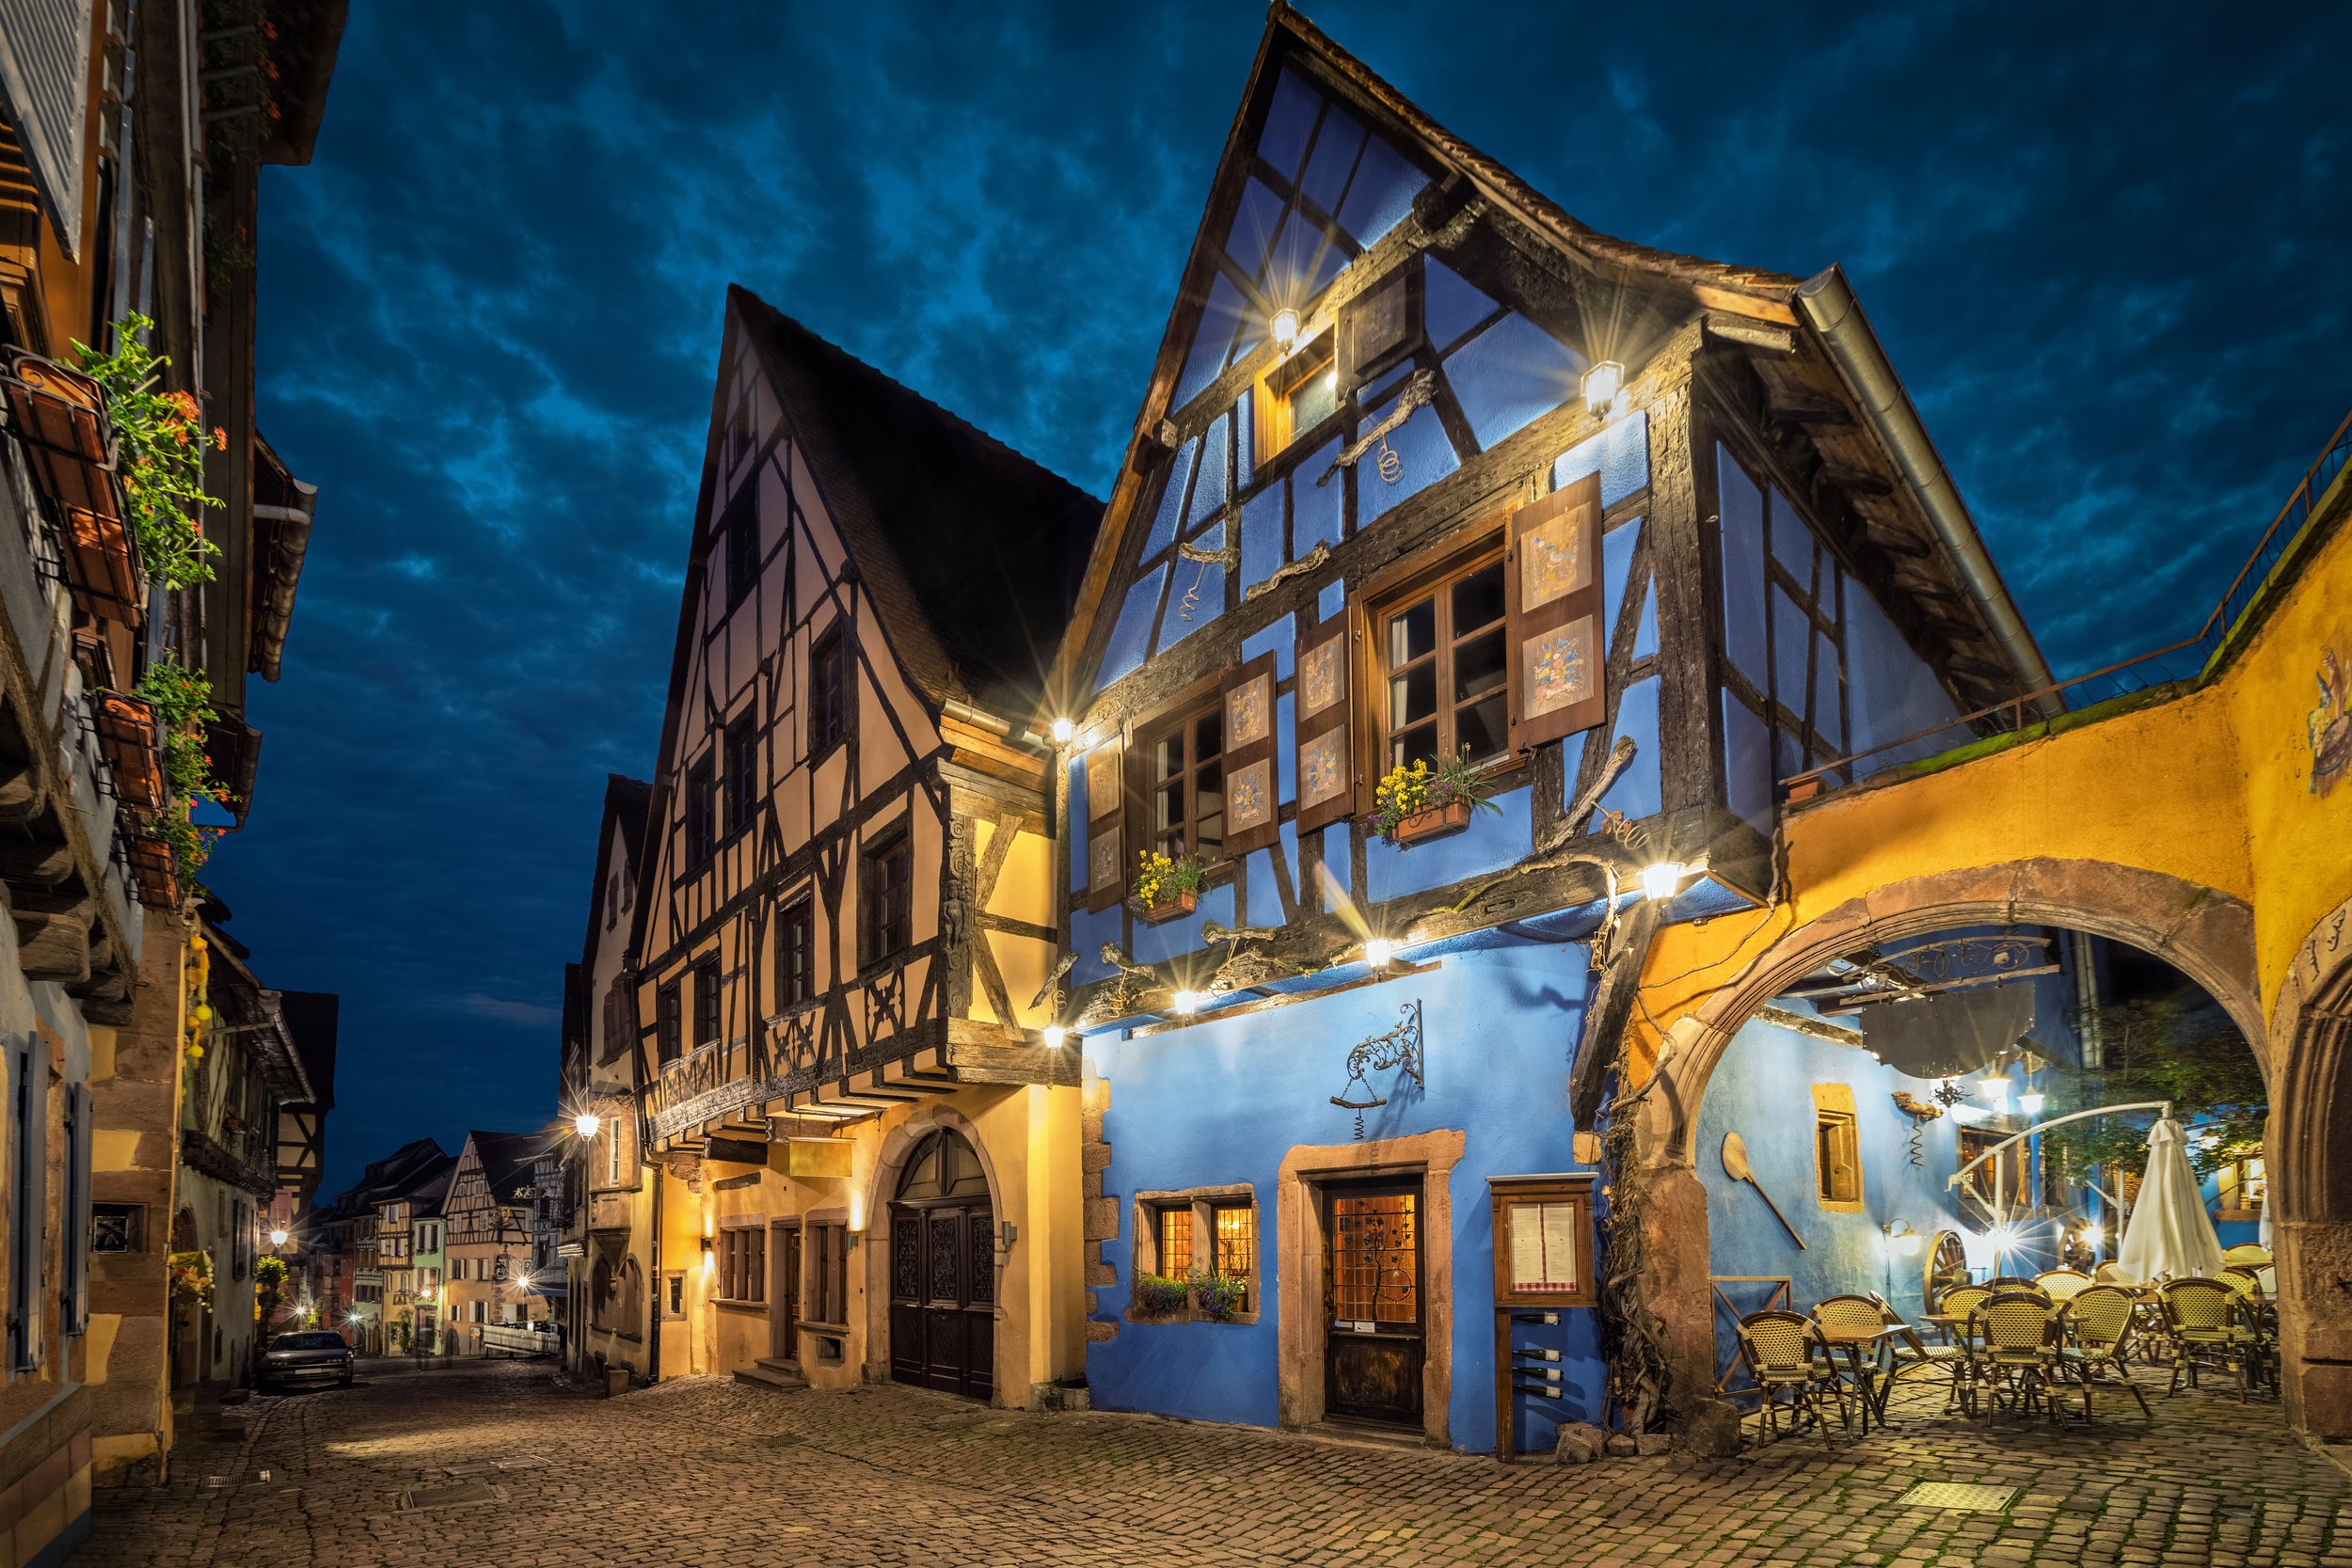 colorful-traditional-french-houses-in-riquewihr-f-2021-10-21-14-30-31-utc.jpg